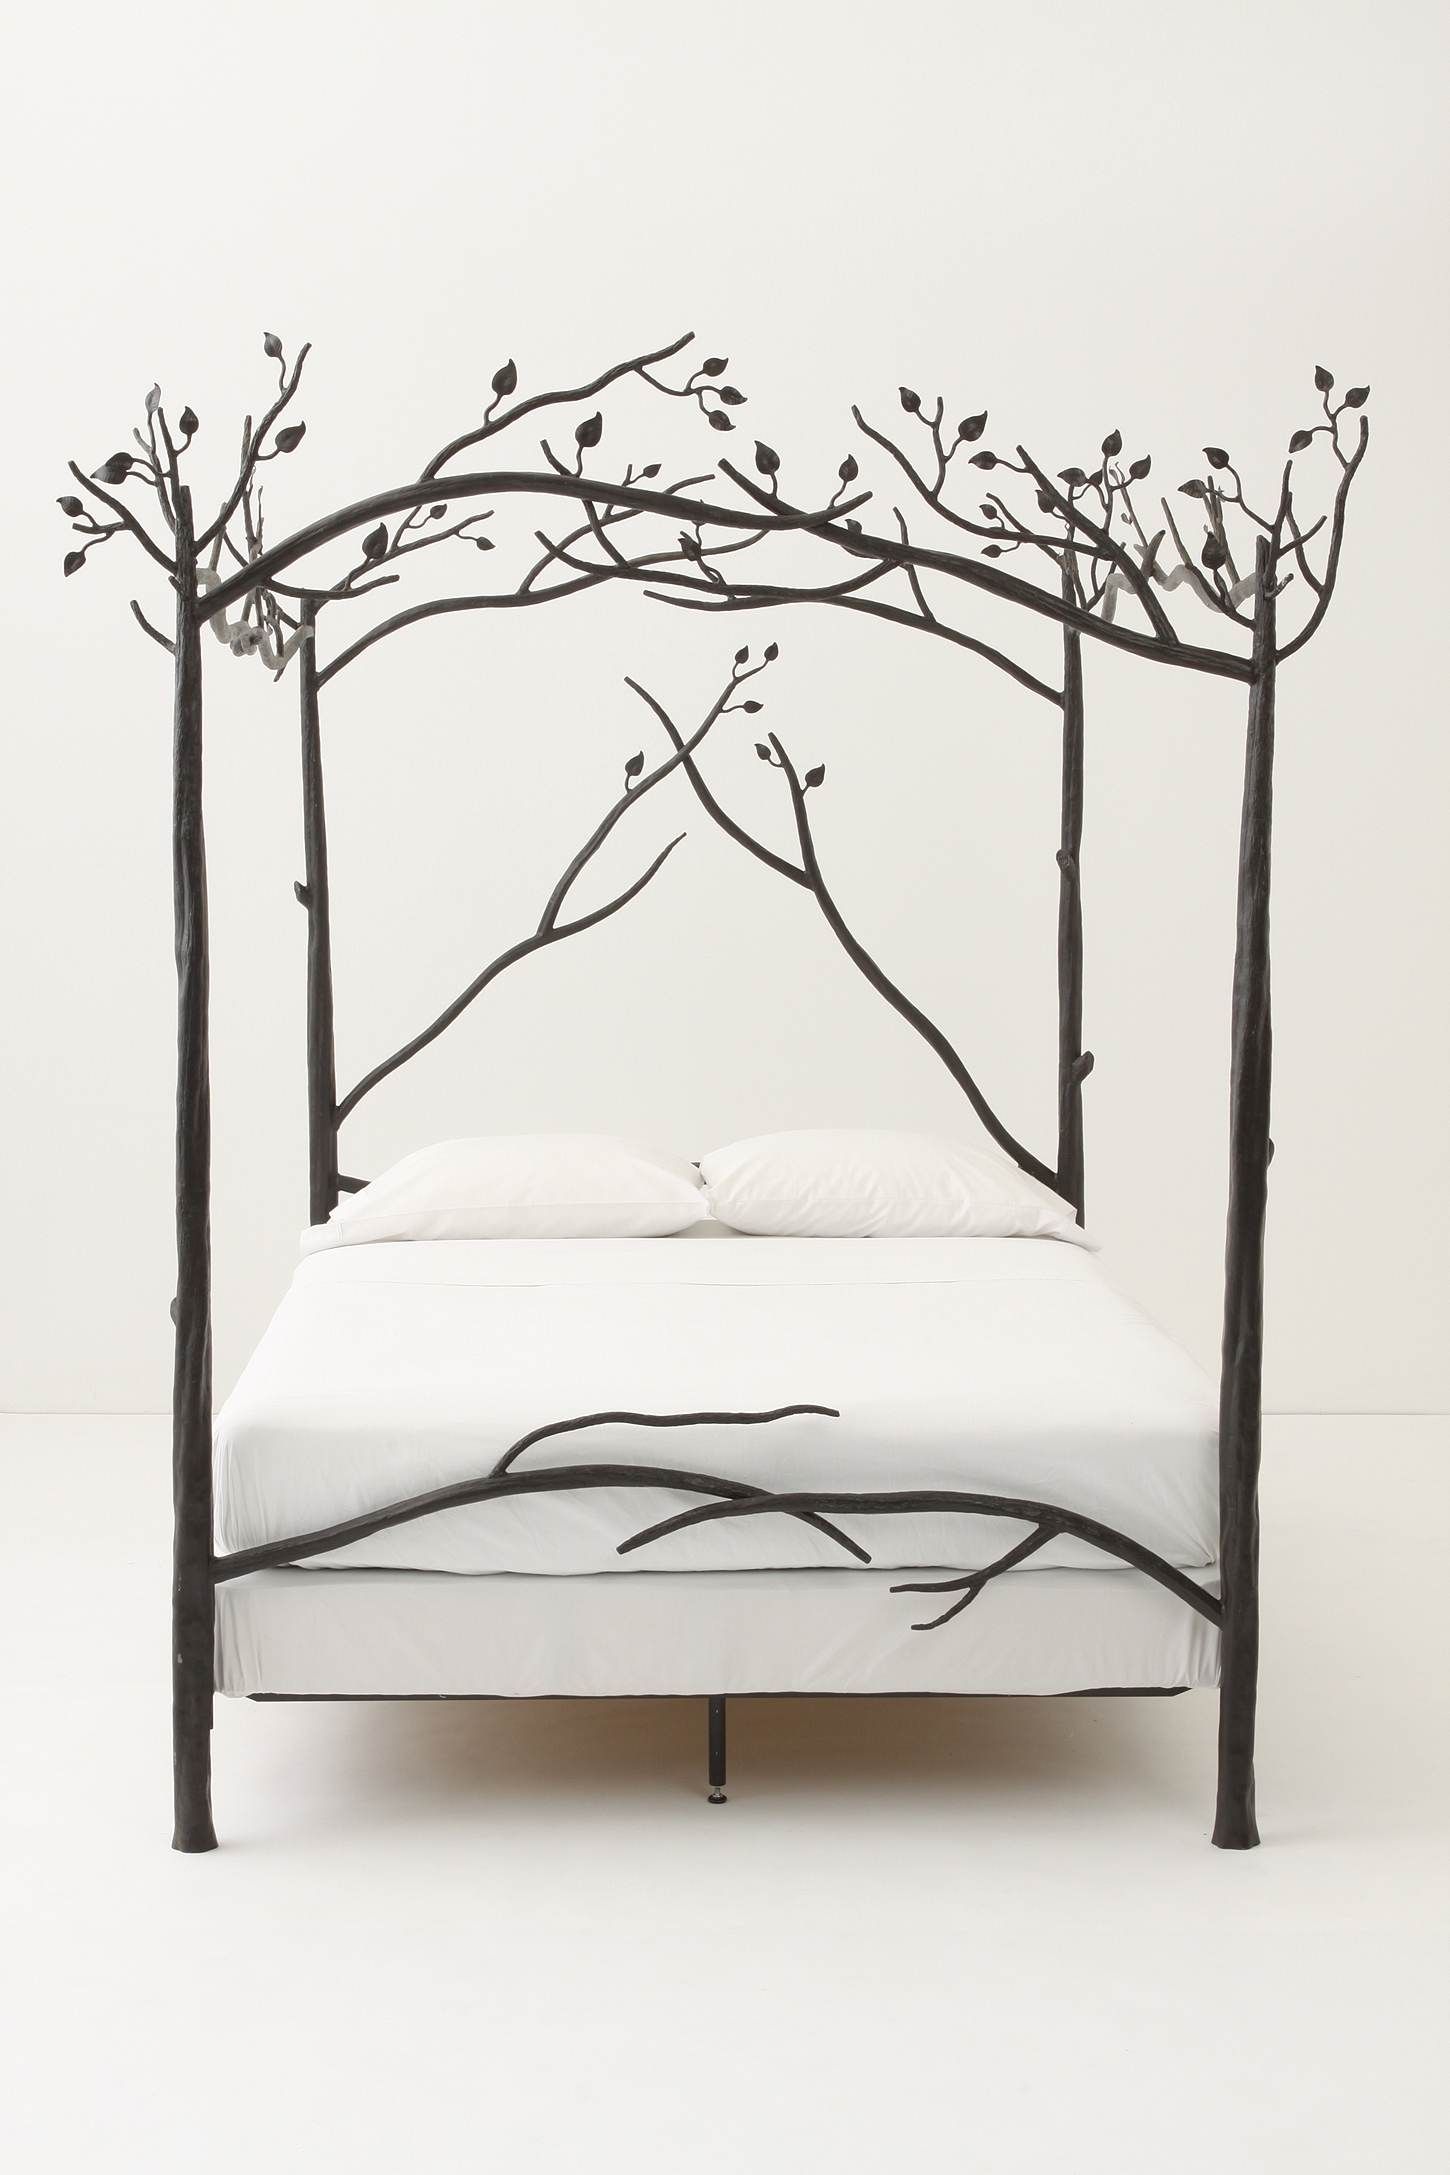 Forest Canopy Bed Anthropologie